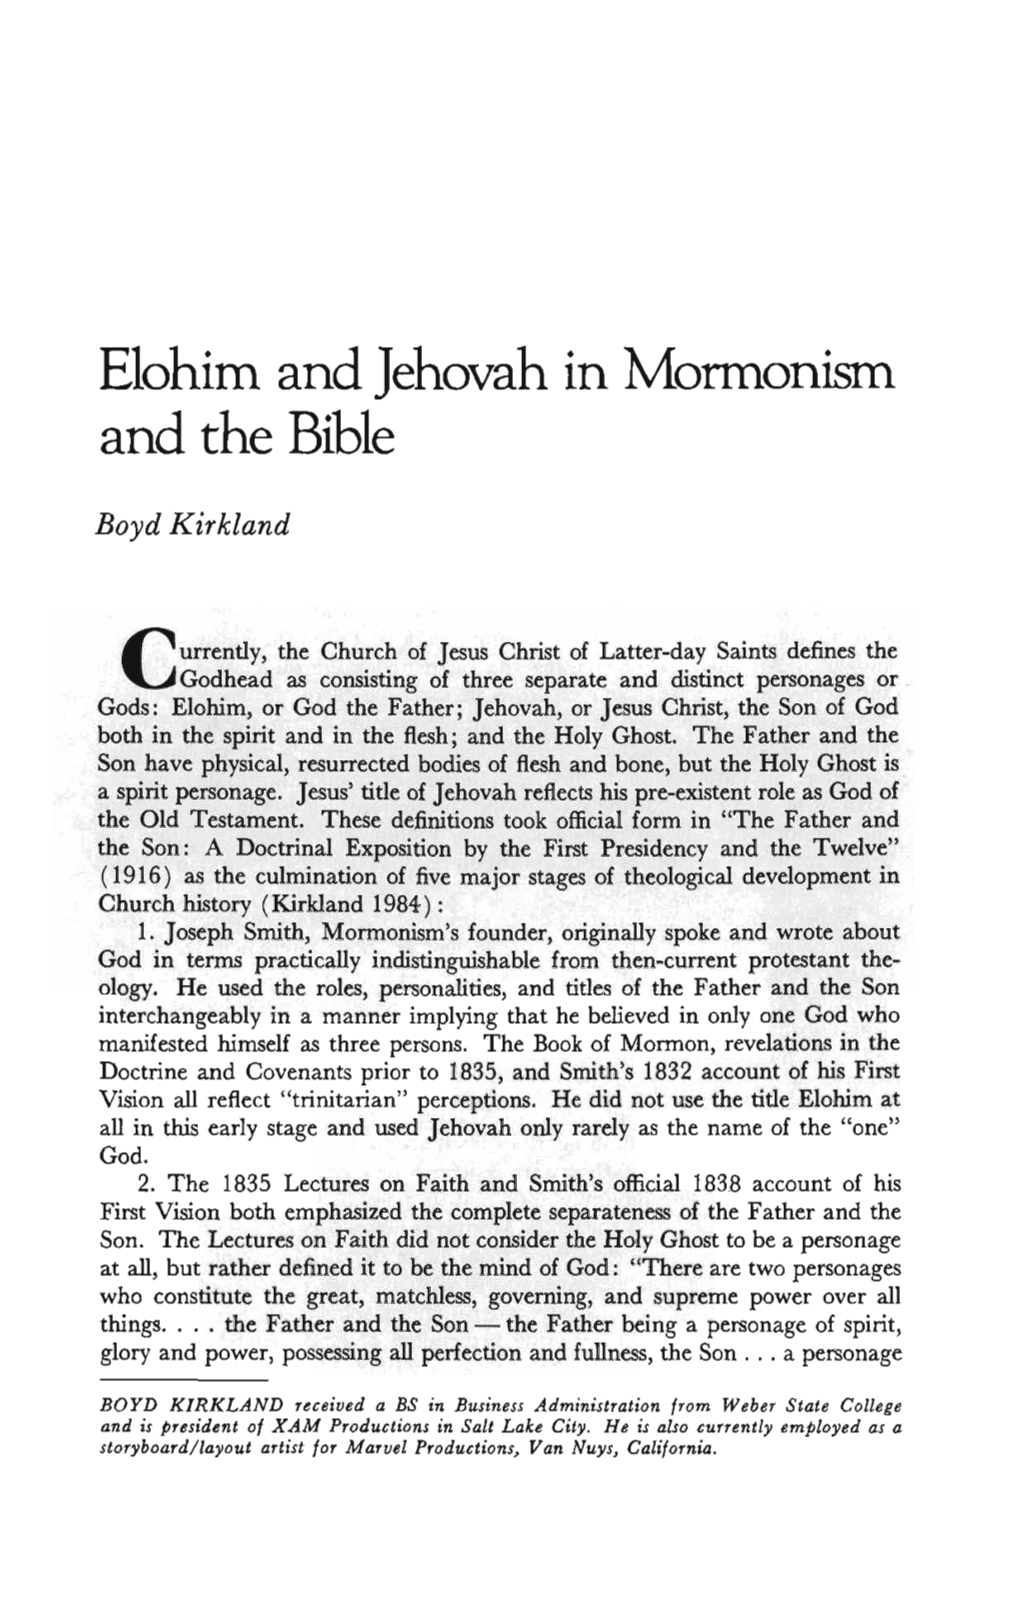 Elohim and Jehovah in Mormonism and the Bible